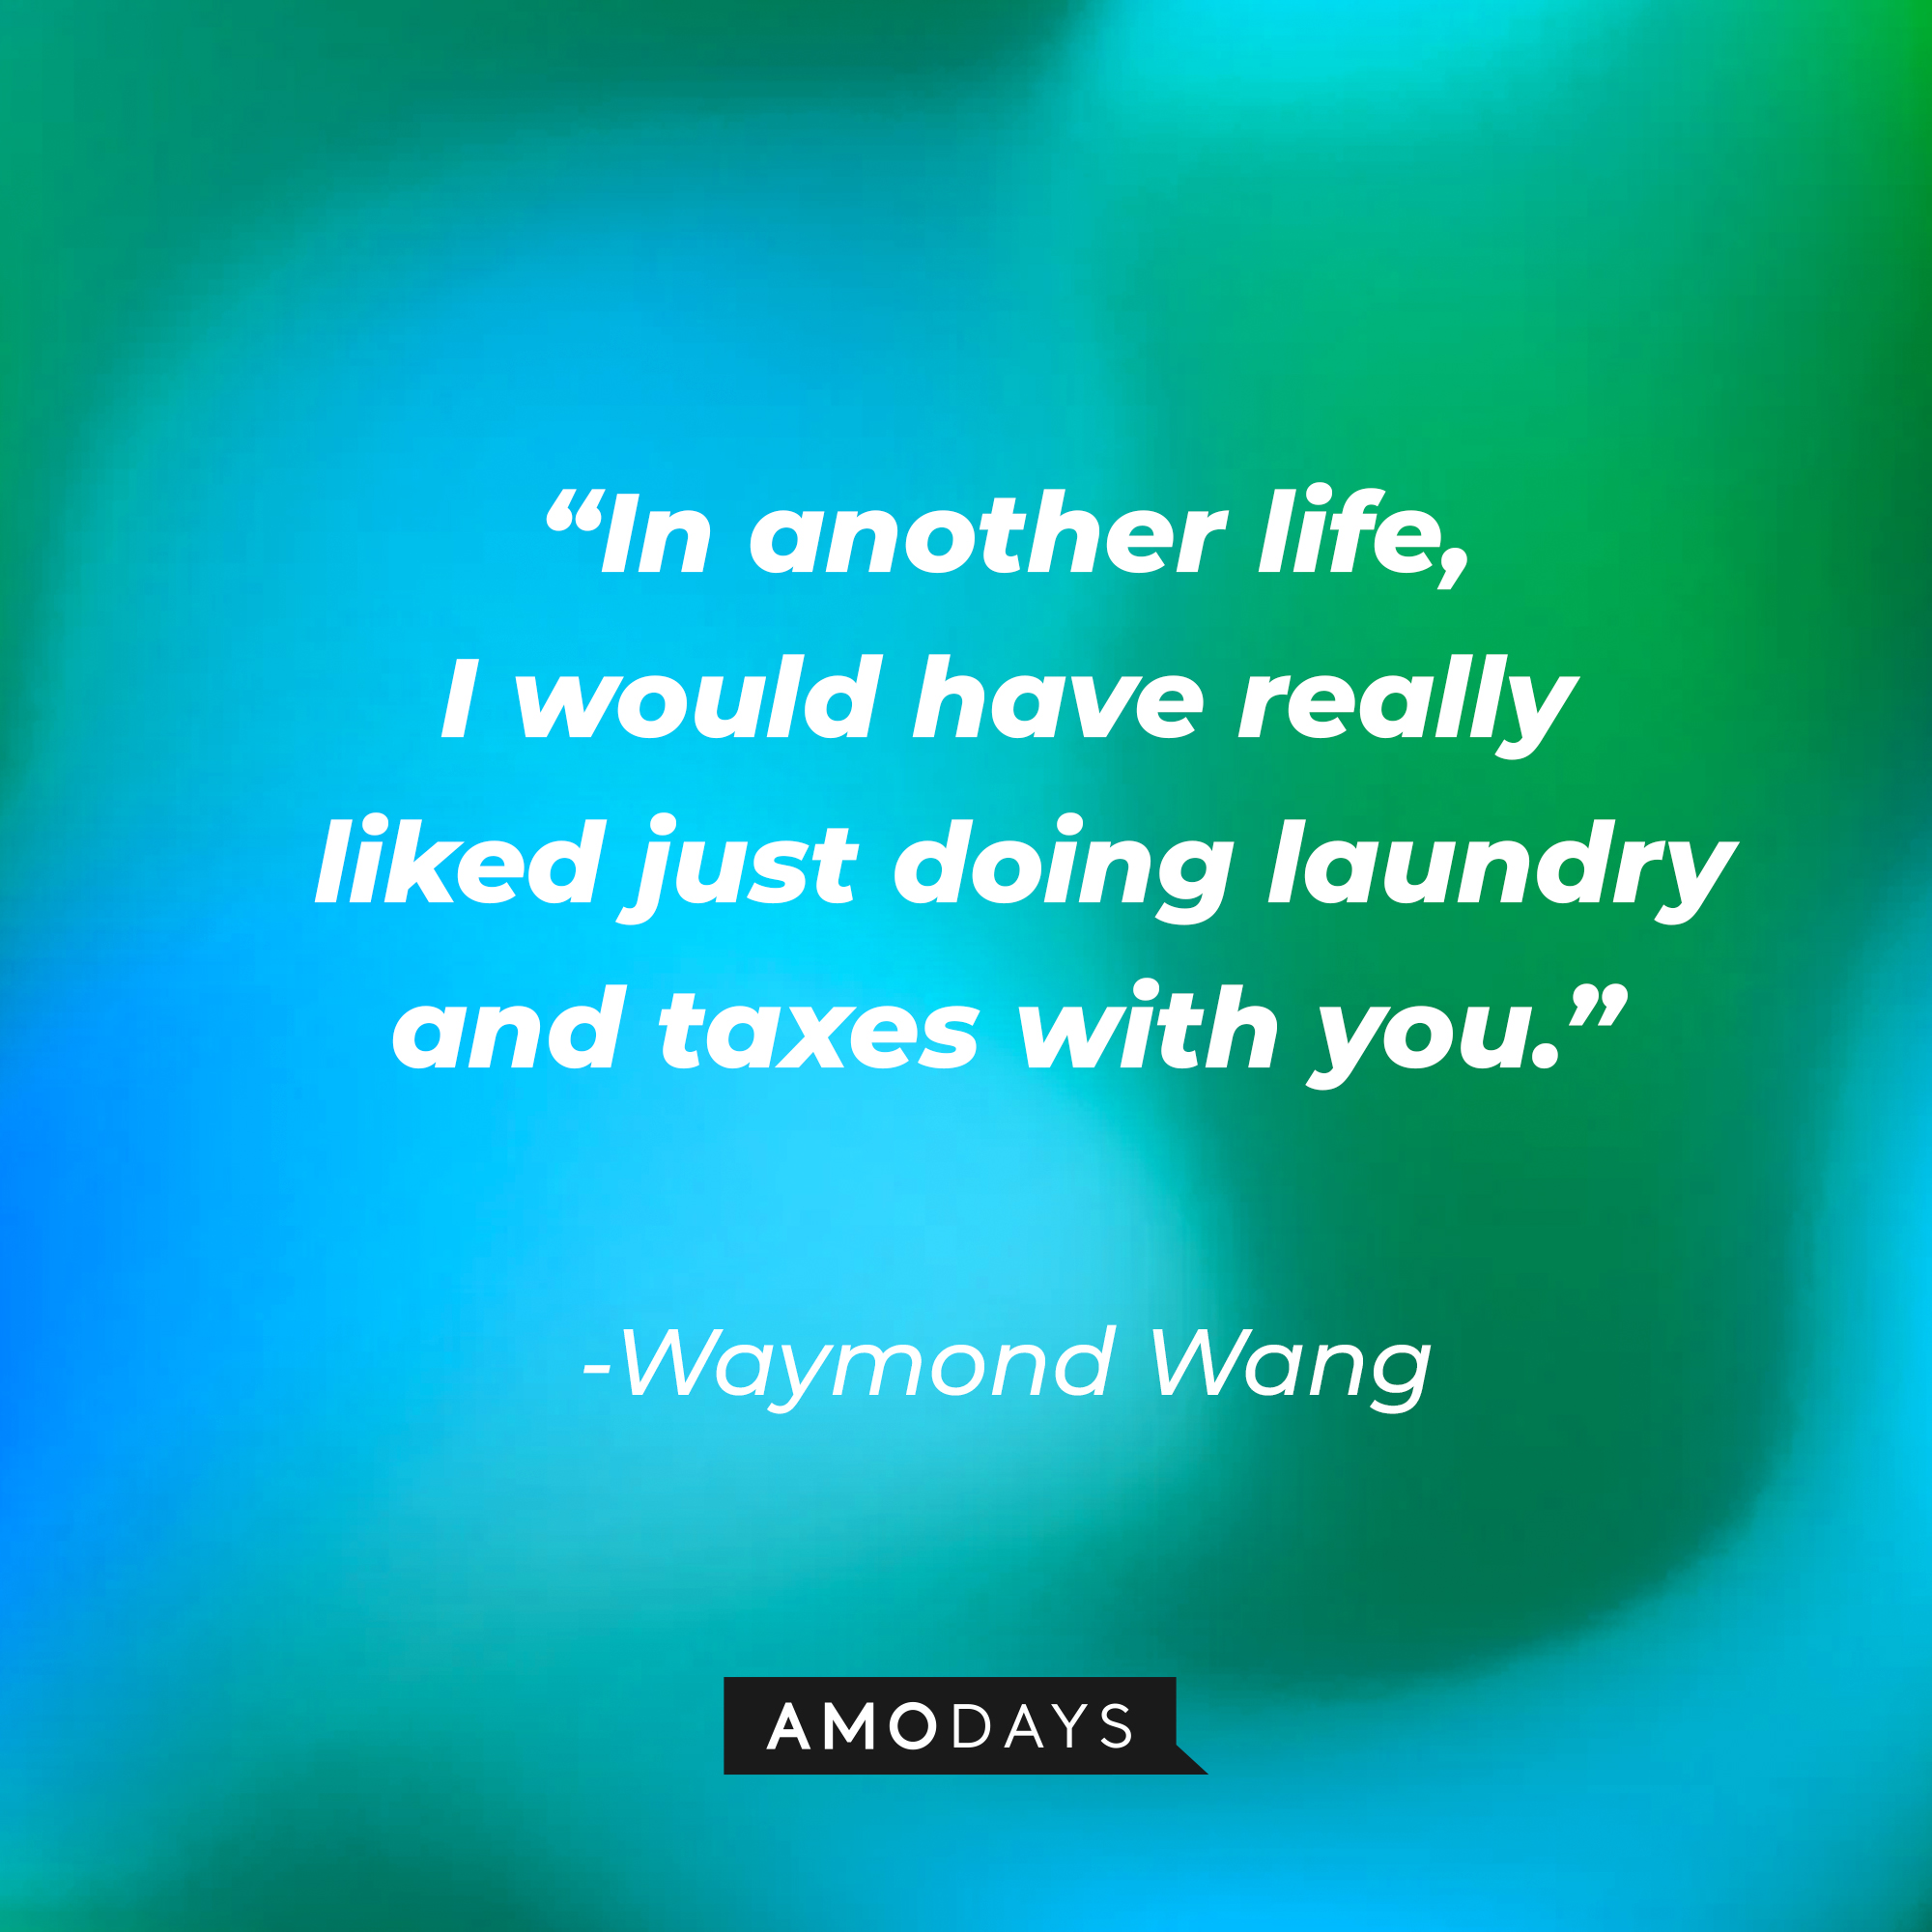 Waymond Wang’s quote: “In another life, I would have really liked just doing laundry and taxes with you.” |  Source: AmoDays